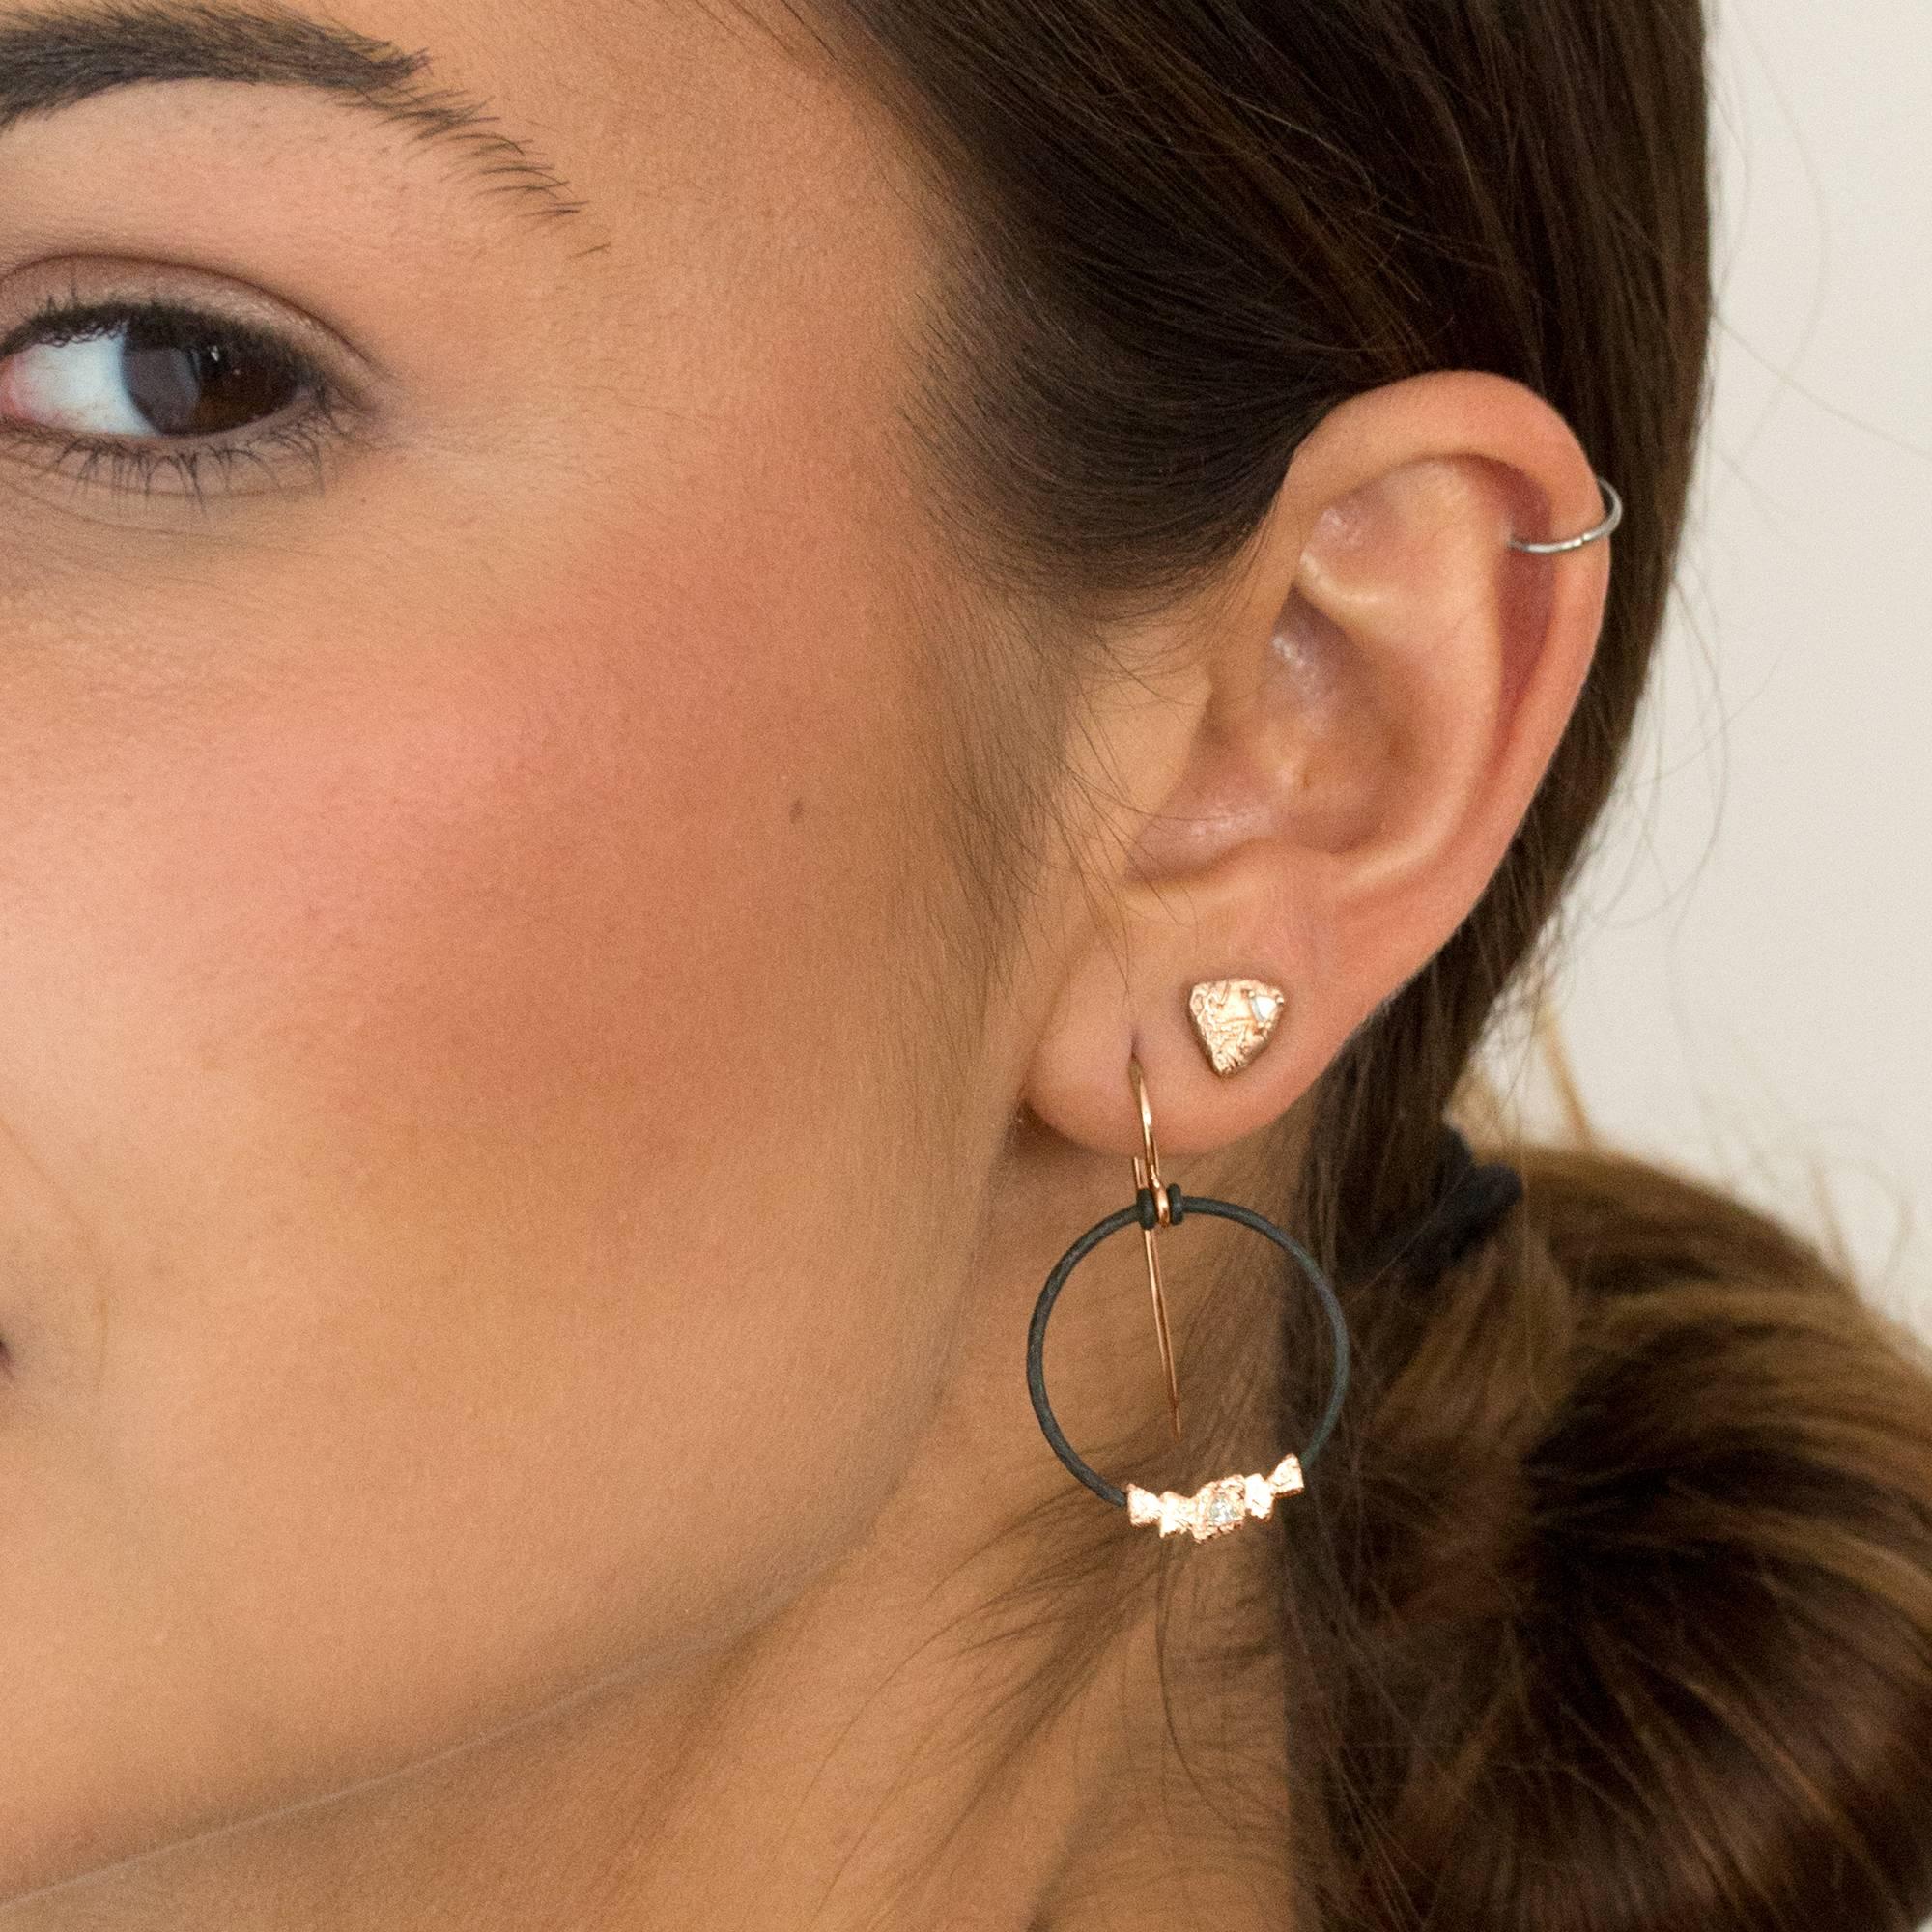 Trigon Stud Earrings handcrafted by jewelry designer Sarah Graham featuring 0.10 total carats of trillion-cut white diamonds set in beautifully-textured 18k rose gold inspired by both the natural beauty of Colorado and the unusual and remarkable